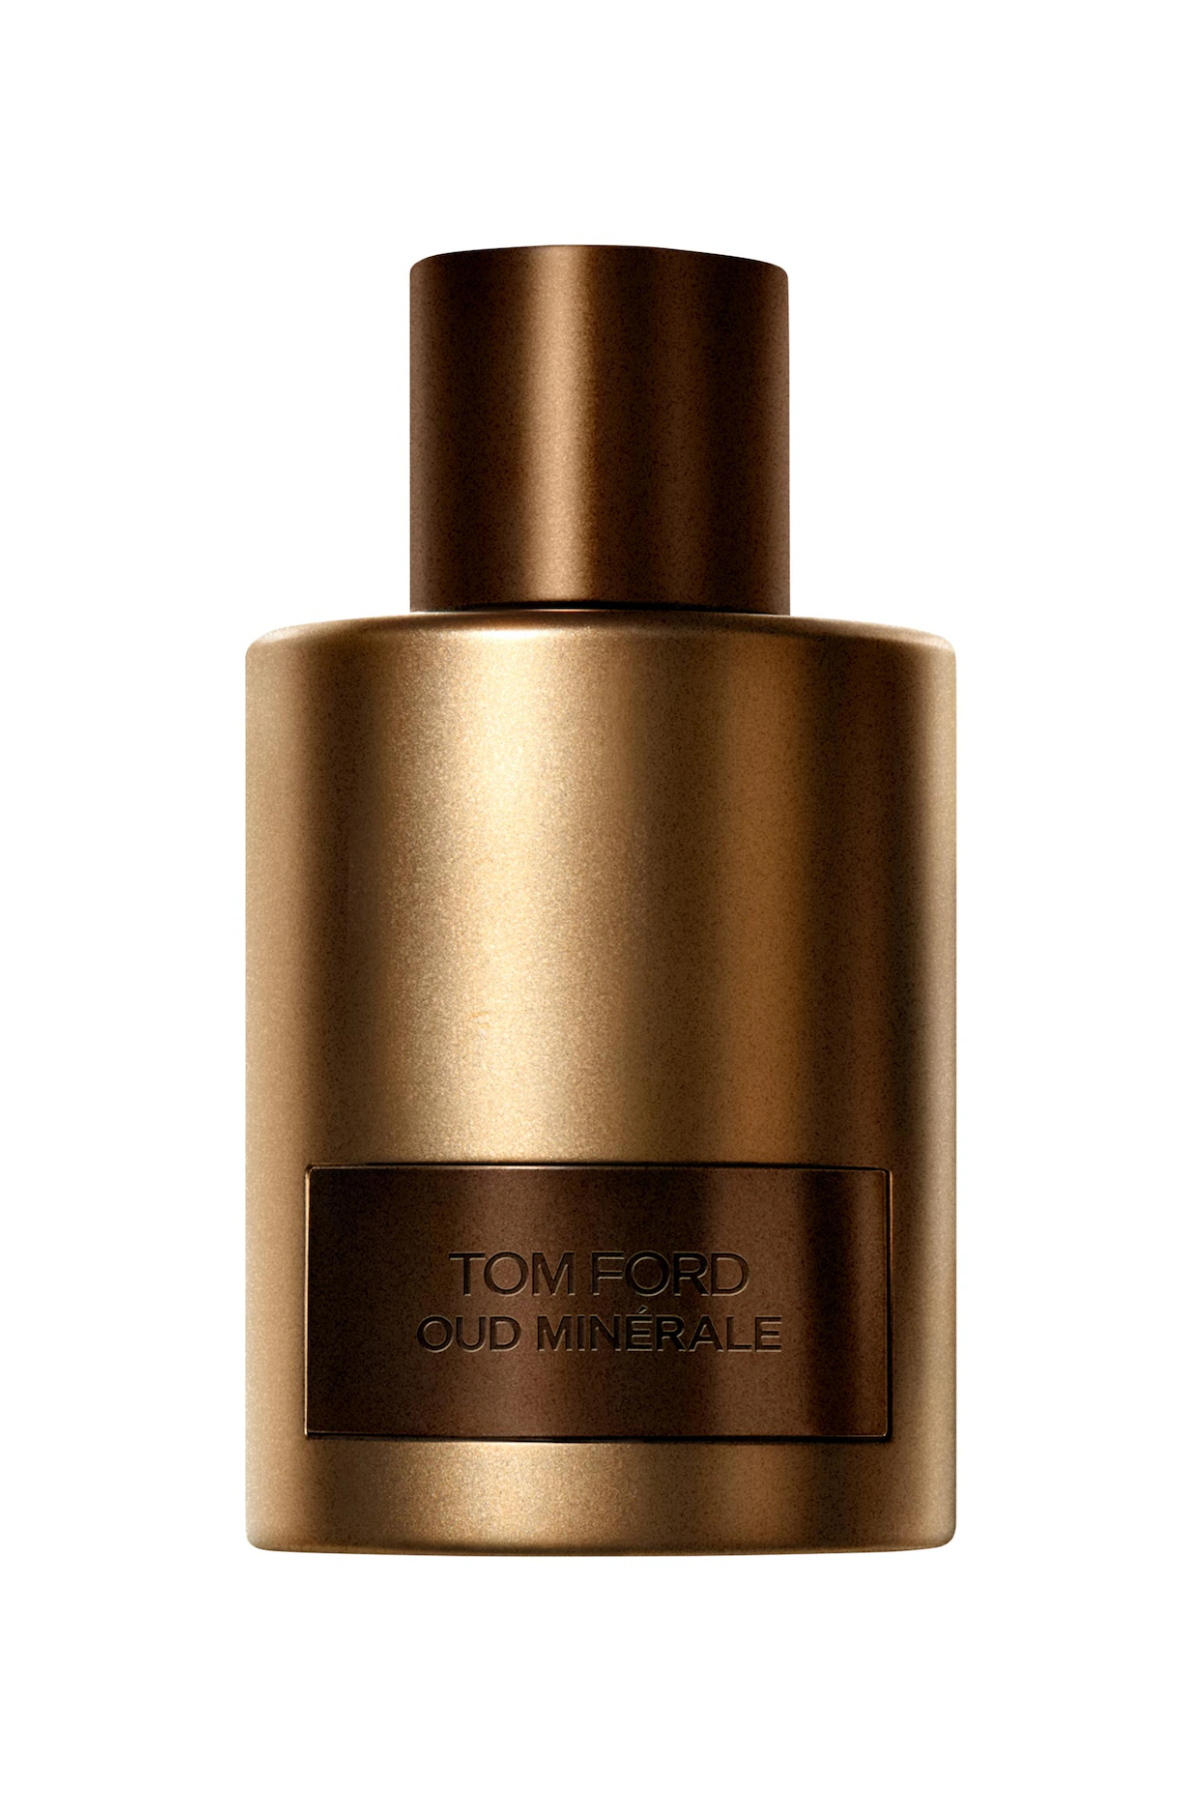 A bottle of Tom Ford Oud Minerale perfume against a white background.